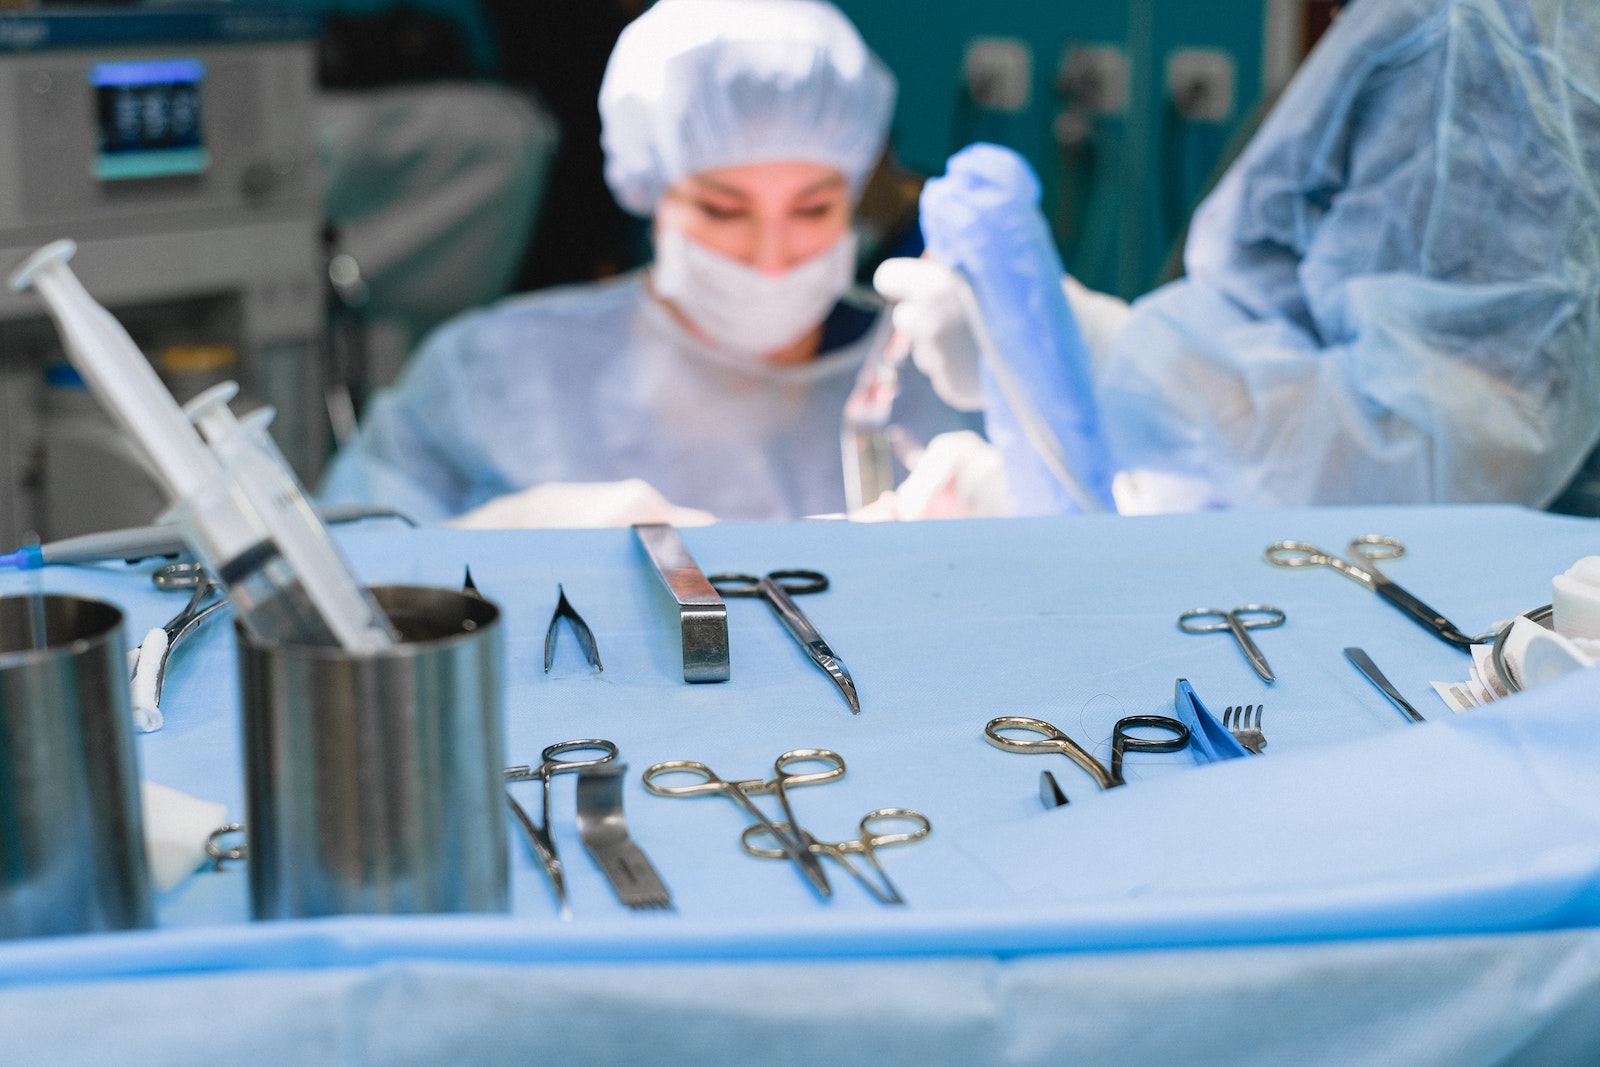 Surgical Equipment and Surgeon Performing Surgery